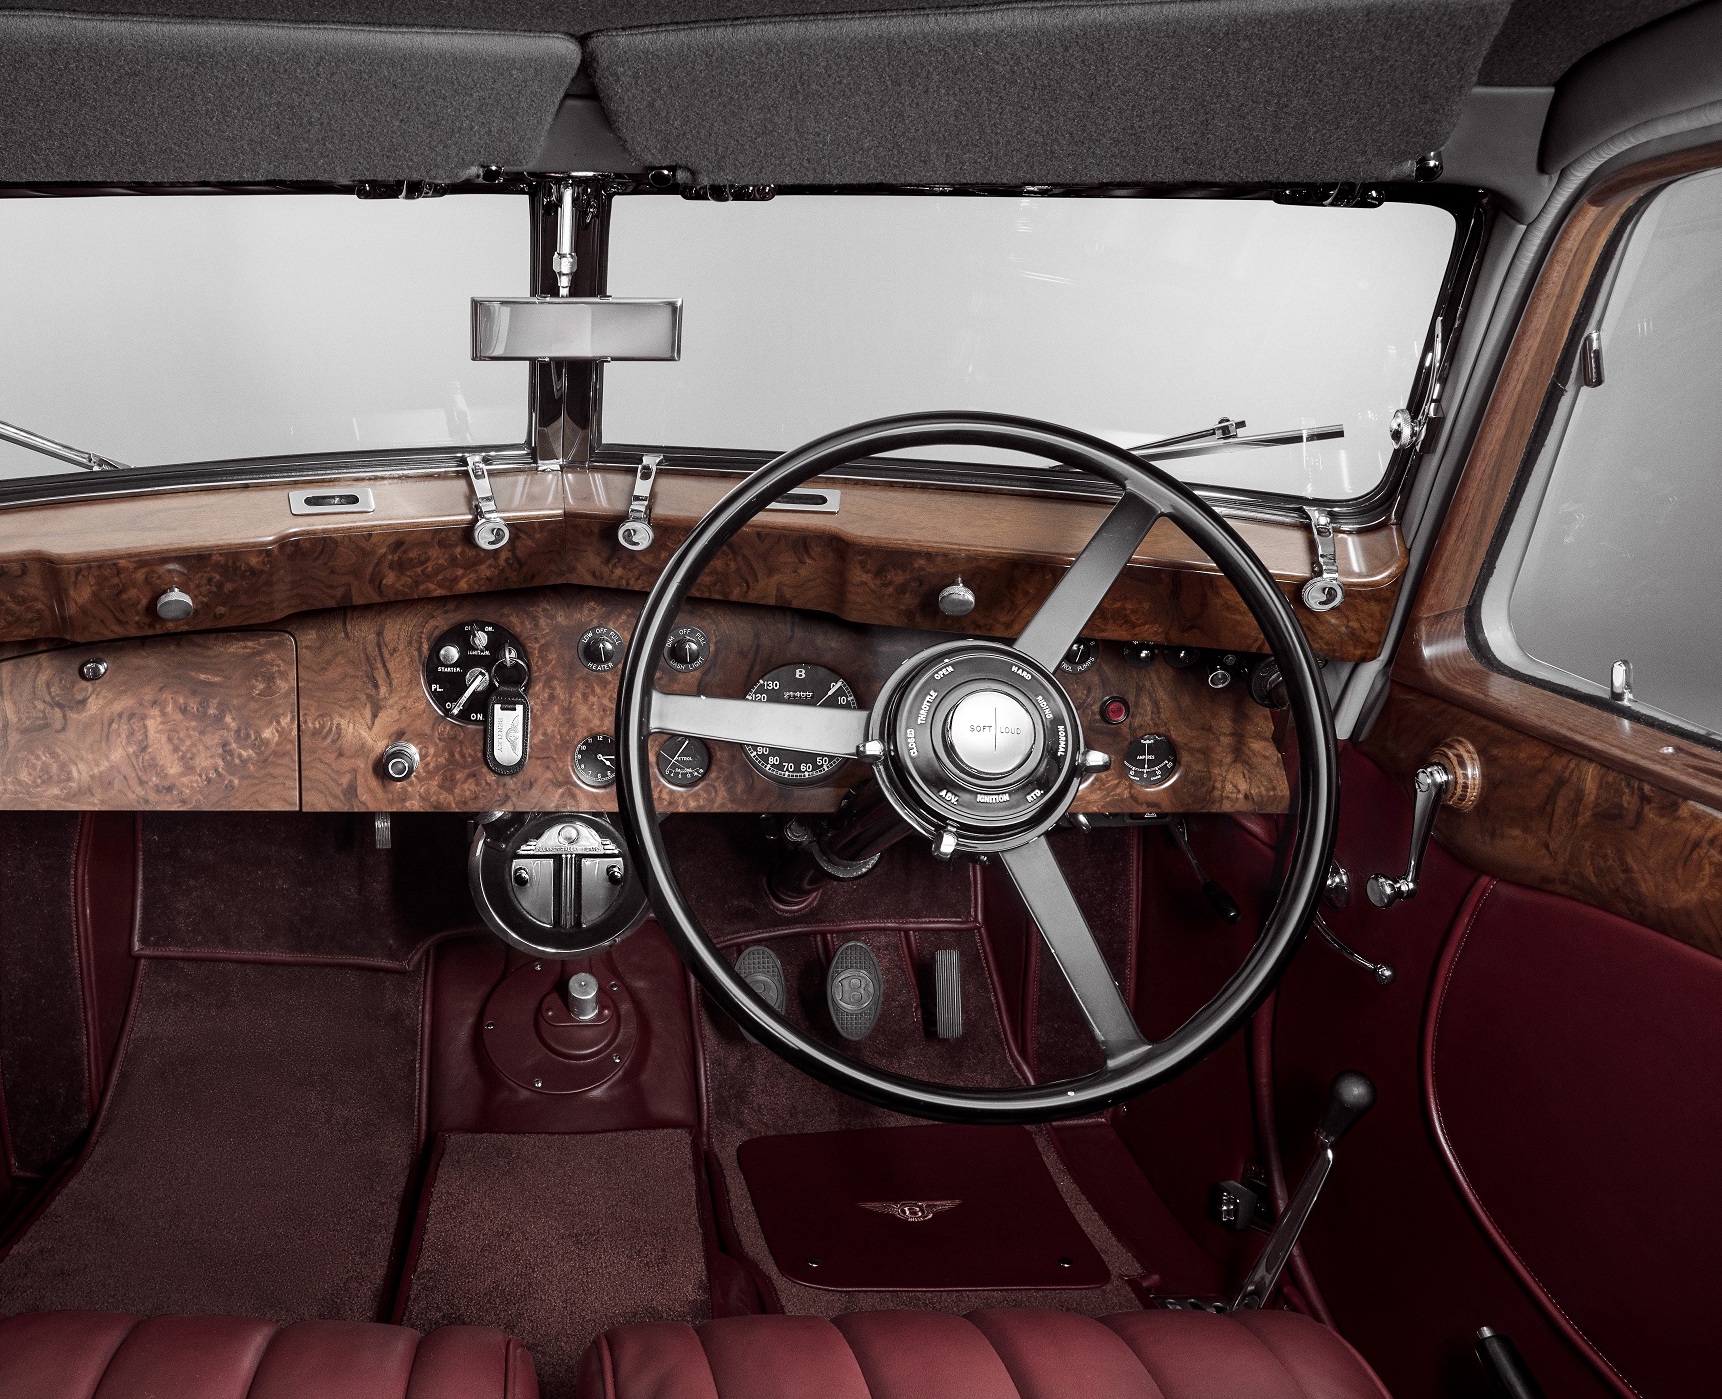 The styling of the 1939 Corniche was a radical step forward from the traditional Bentleys of the 1920s & â€™30s.